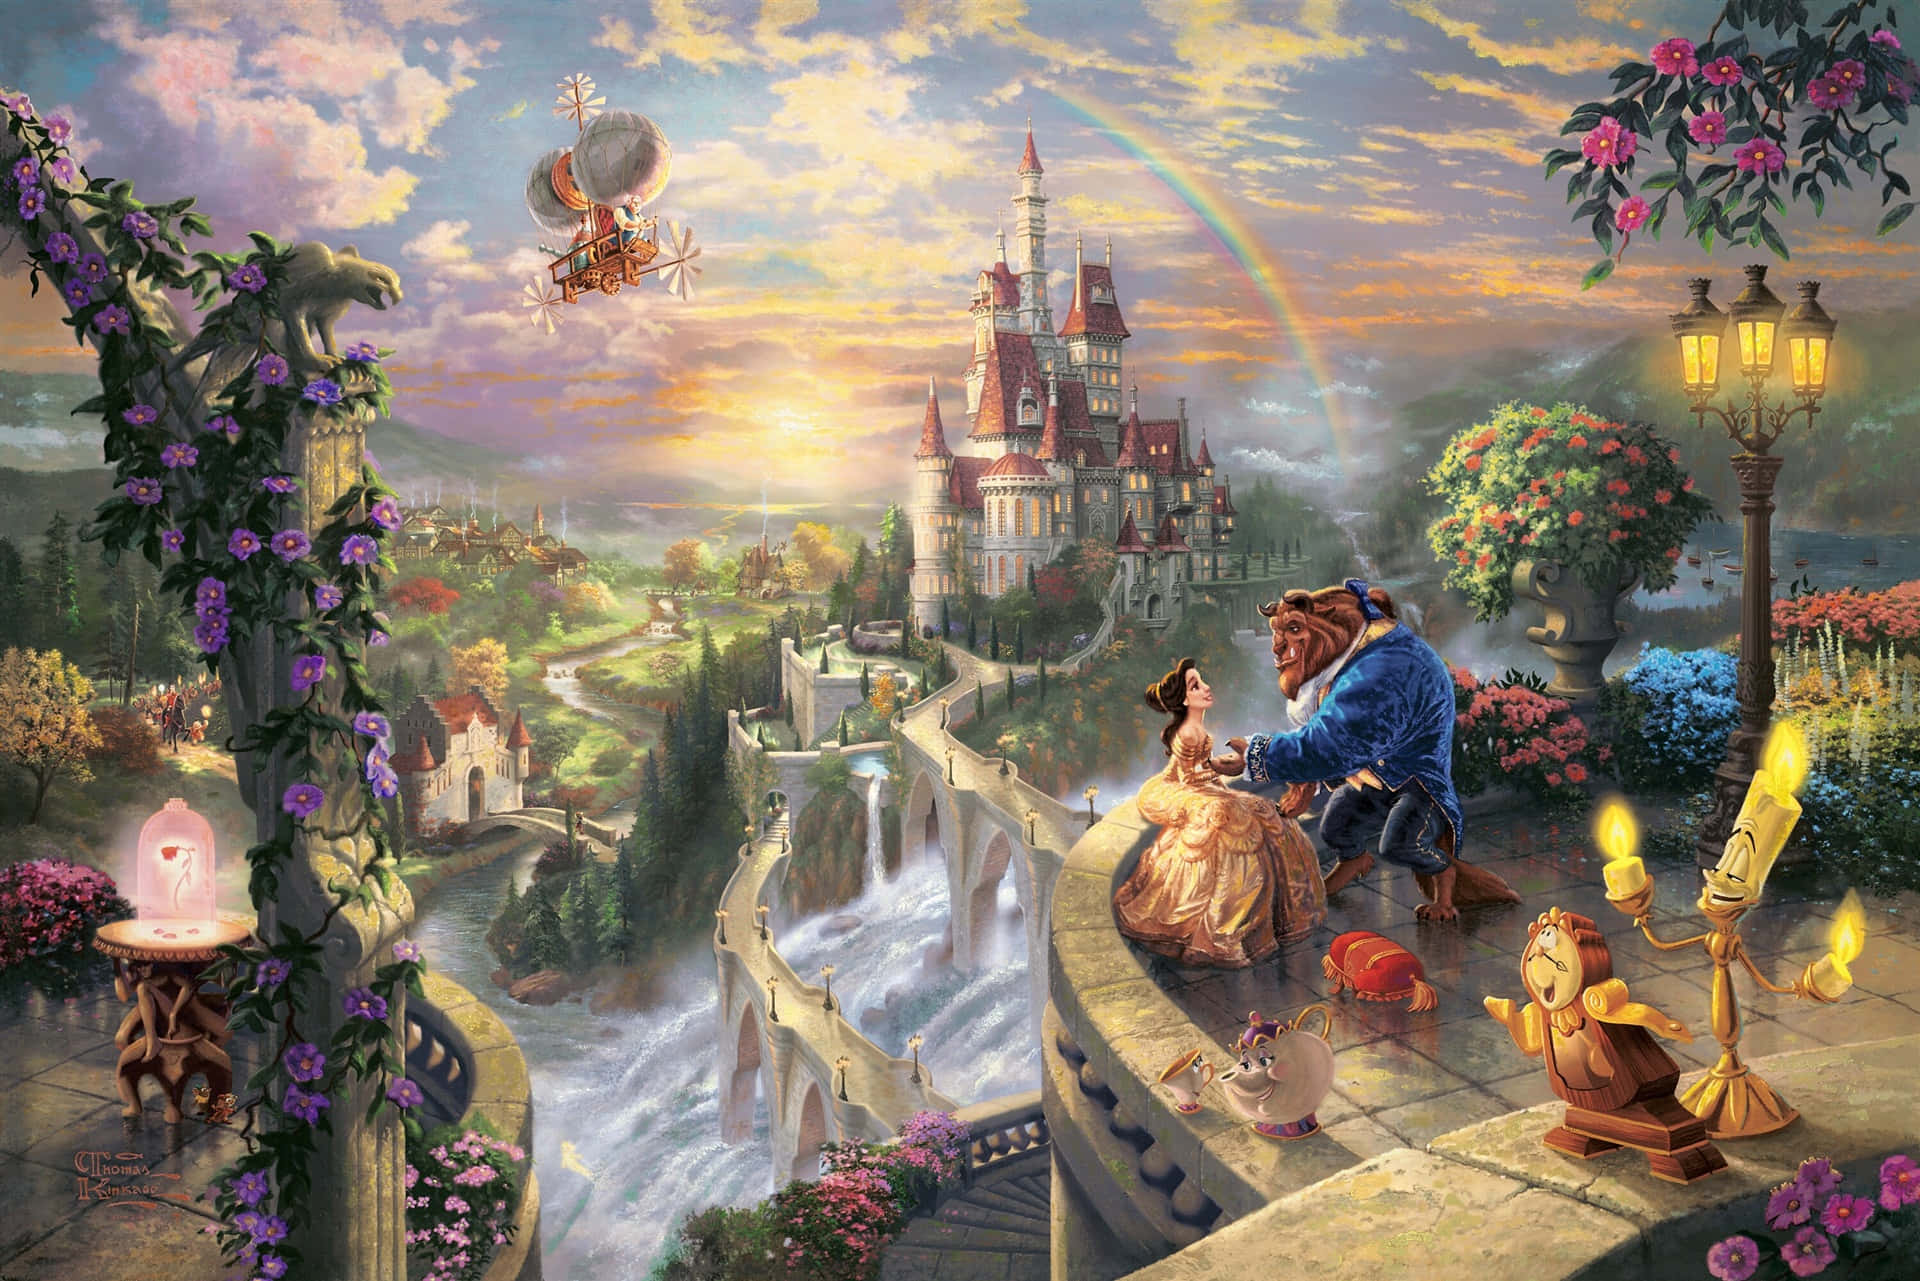 Experience the Magic of Disney World in HD Wallpaper